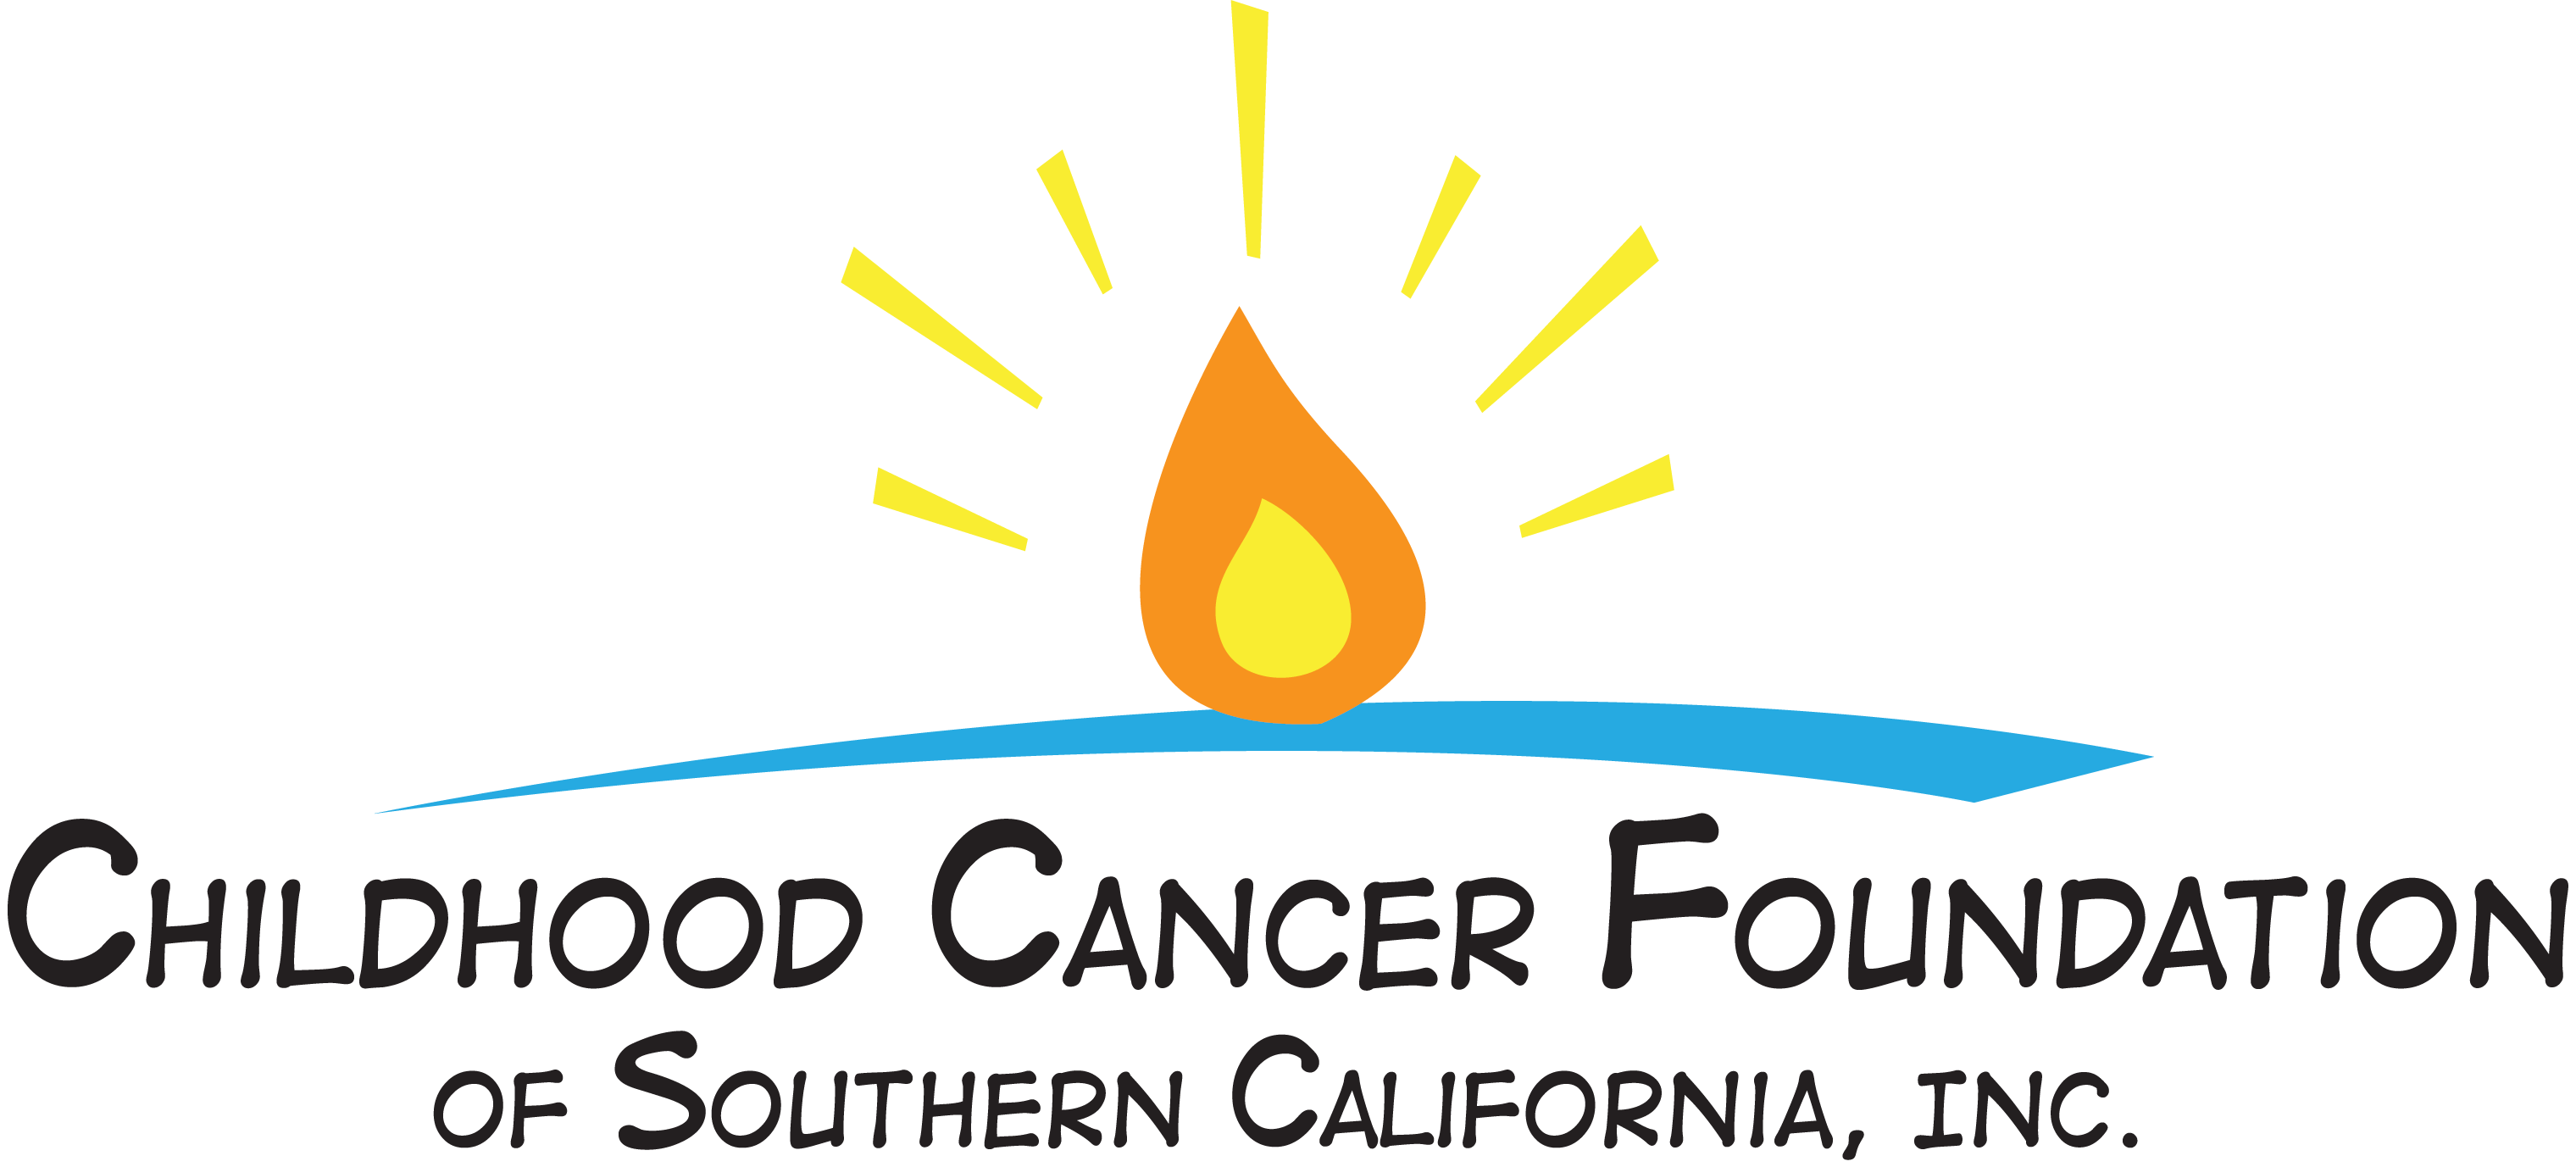 Donations Childhood Cancer Foundation Of Southern California Inc